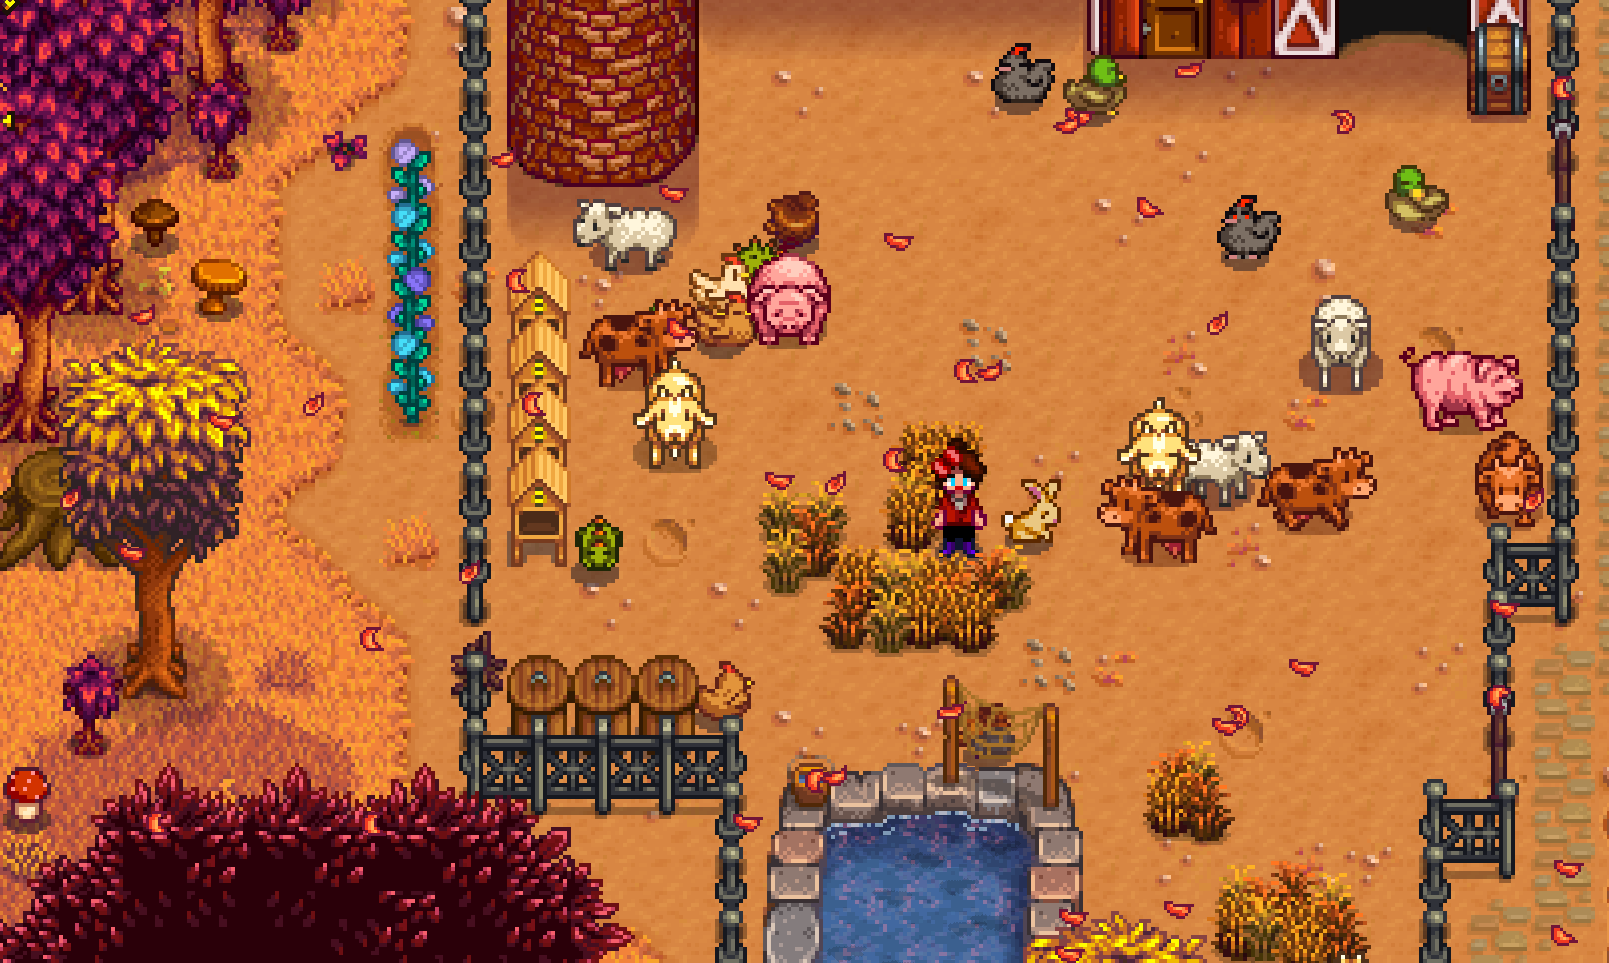 An animal pen in Fall. The farmer (a brunette in red and black) stands beside a rabbit and several other animals.